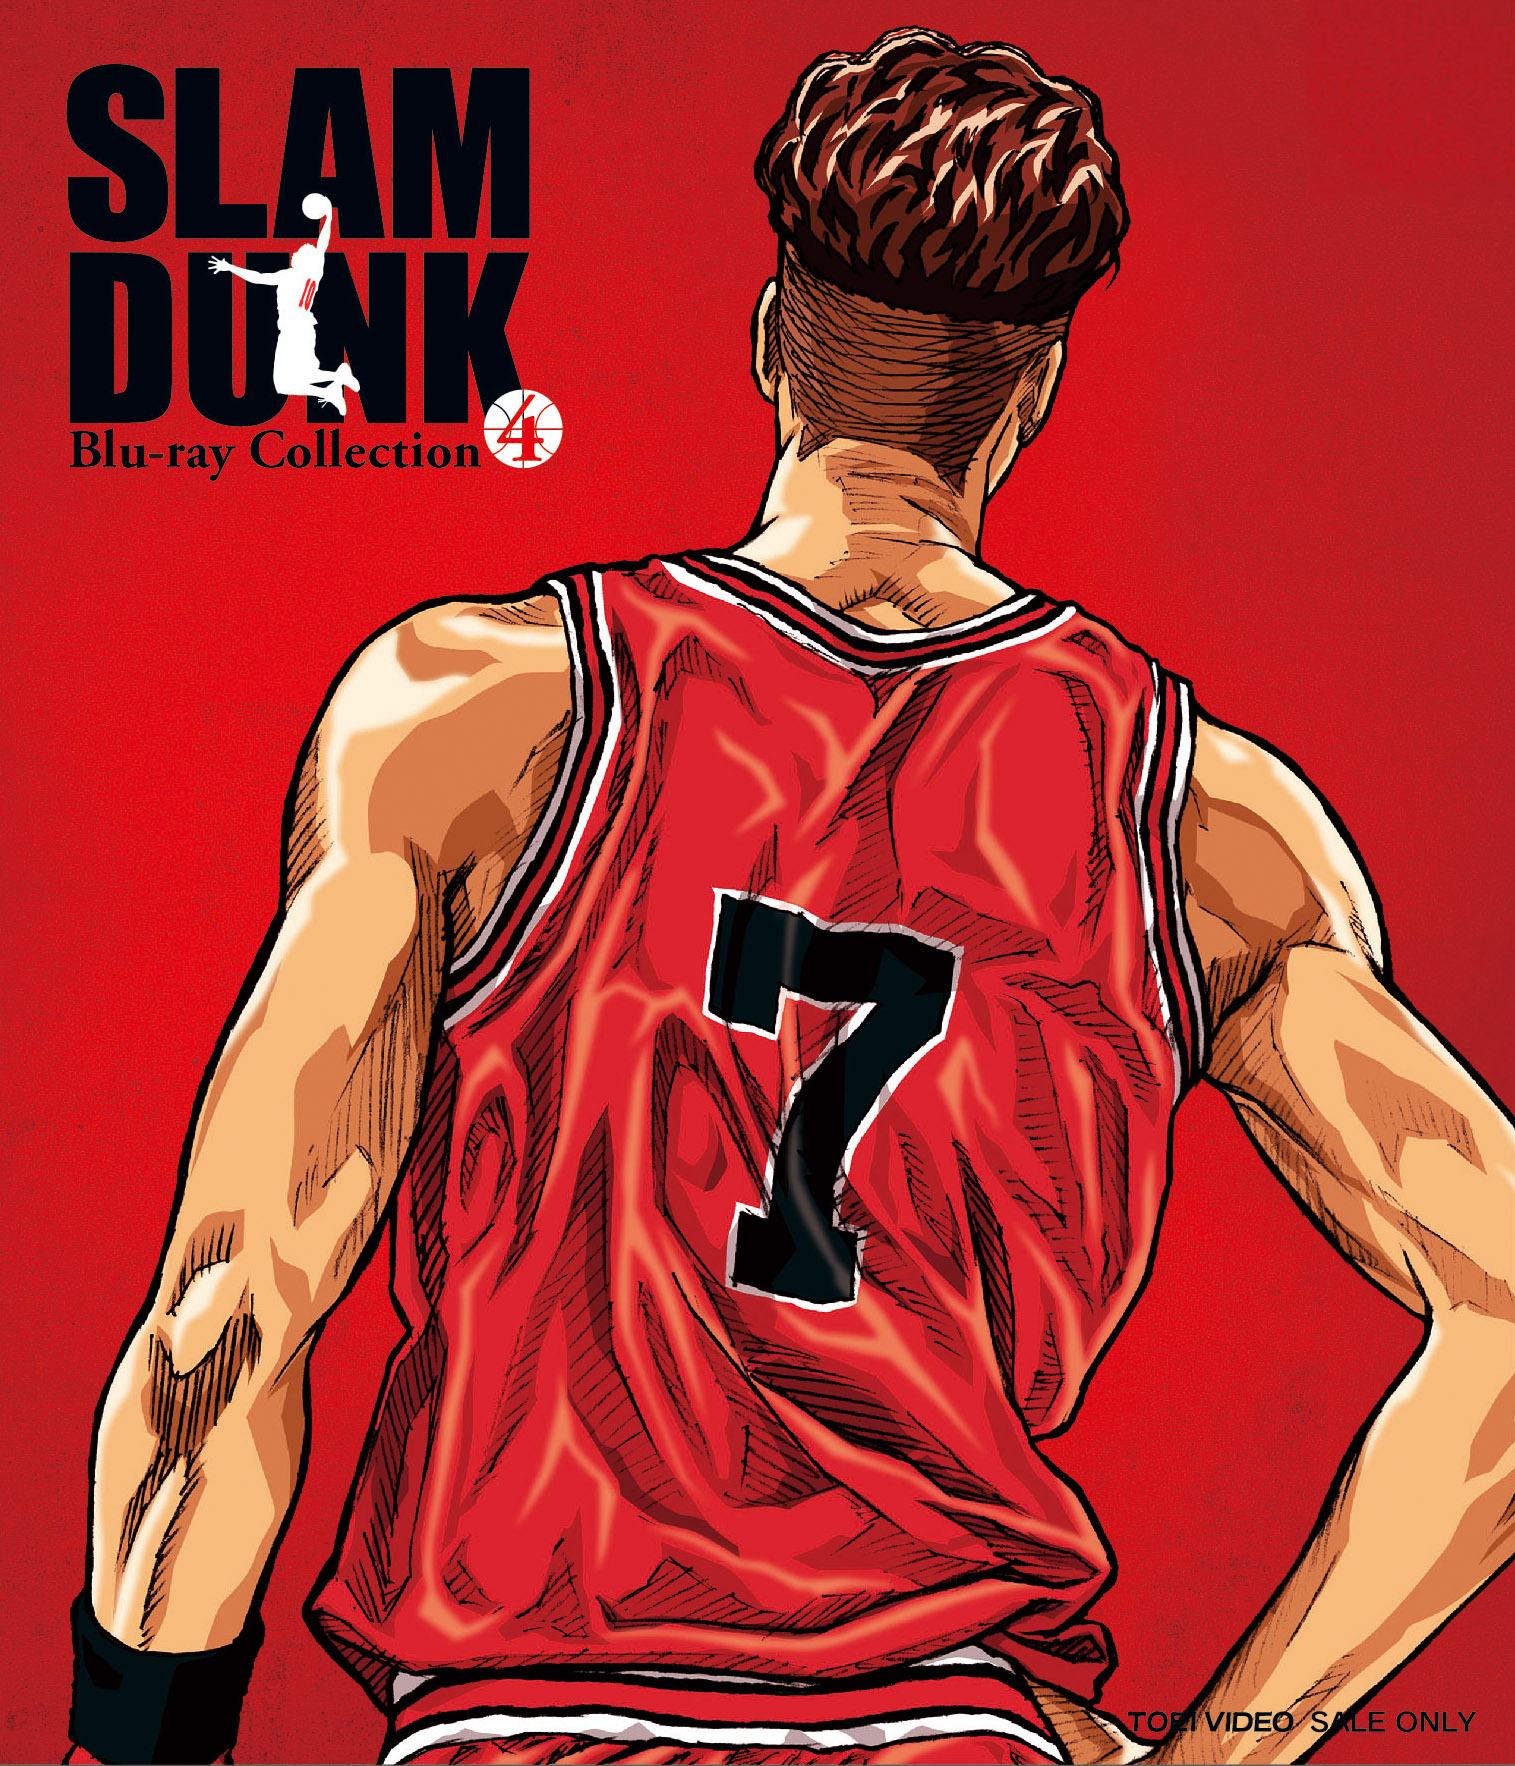 SLAM DUNK Blu-ray Collection　Vol.4